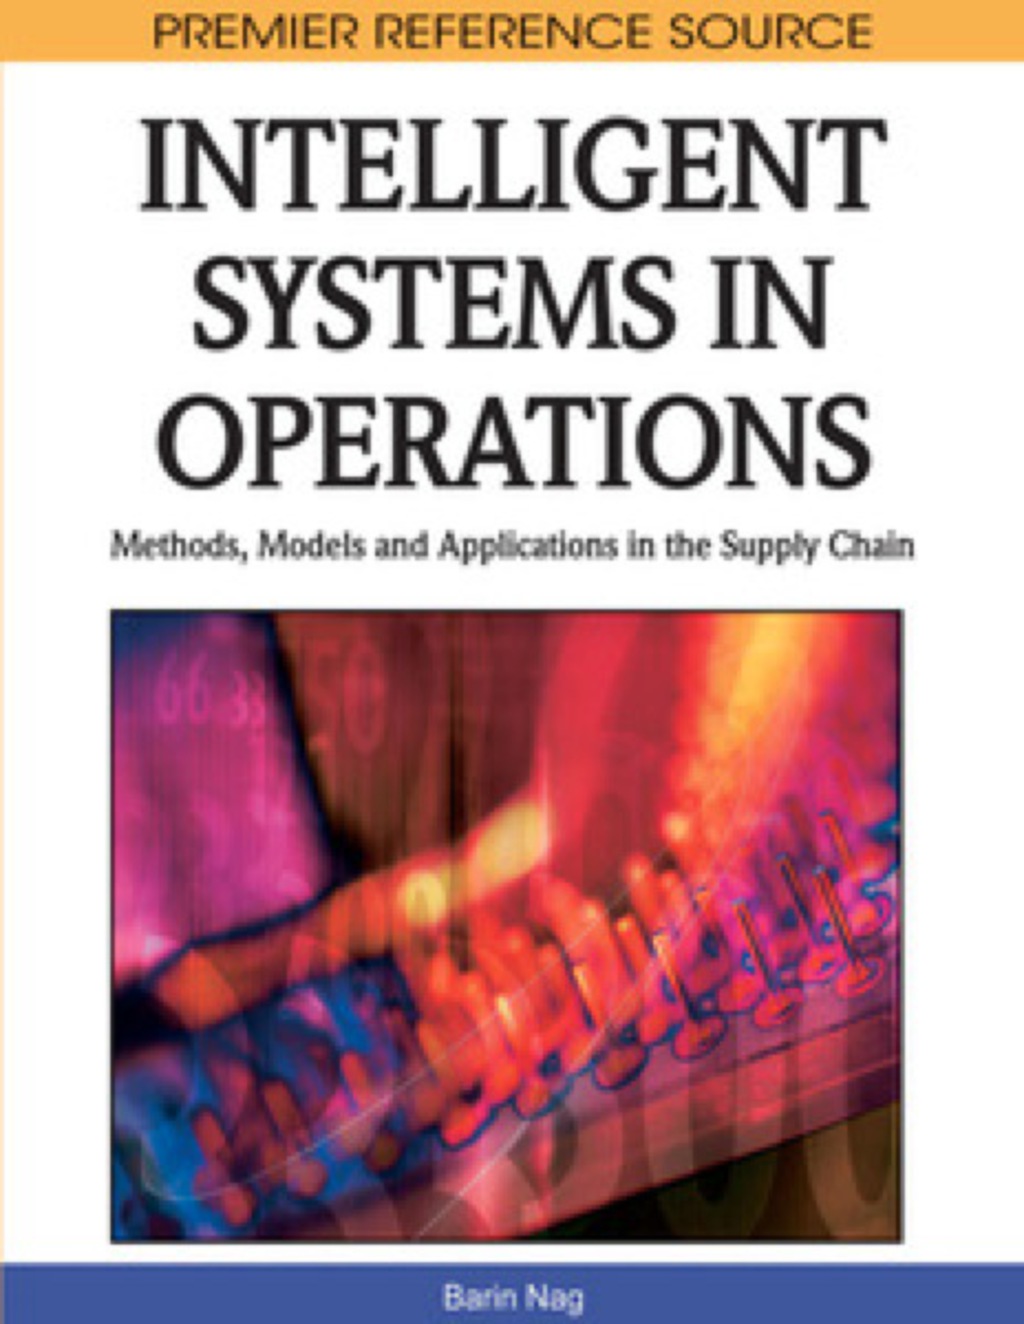 Intelligent Systems in Operations (eBook) - Barin Nag,